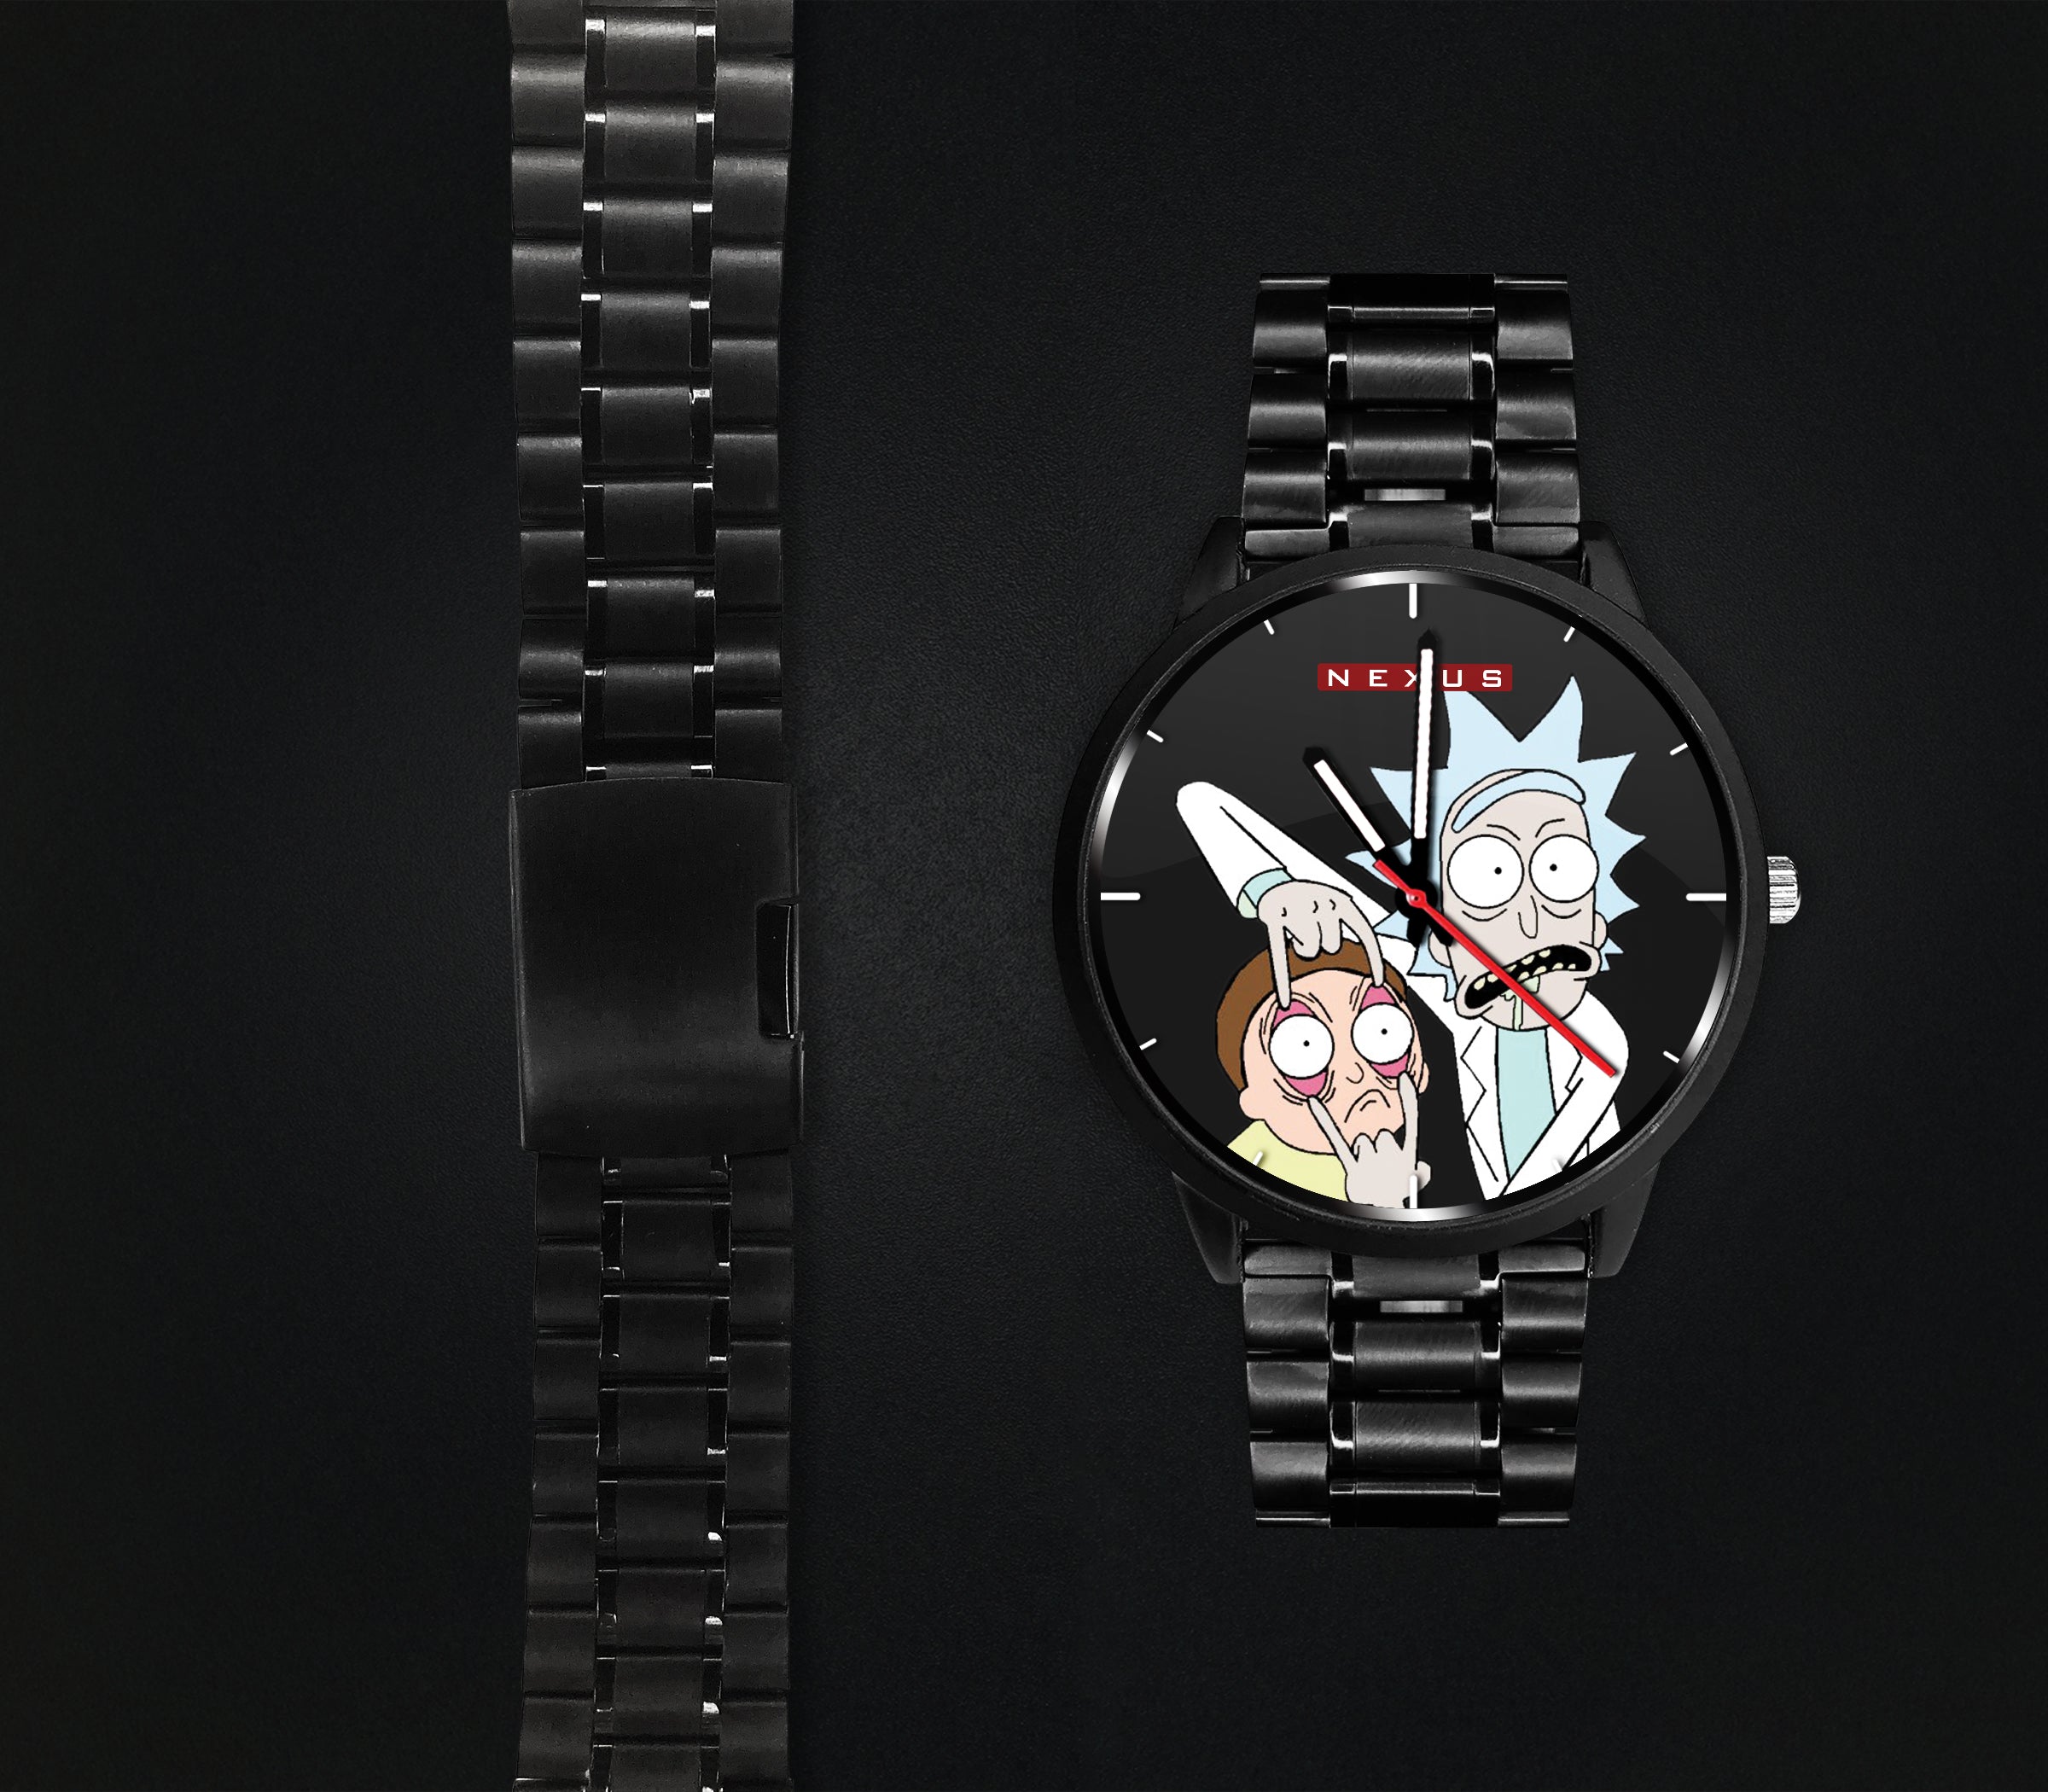 Amazed Rick and Morty Watch - Rick and Morty | eBay